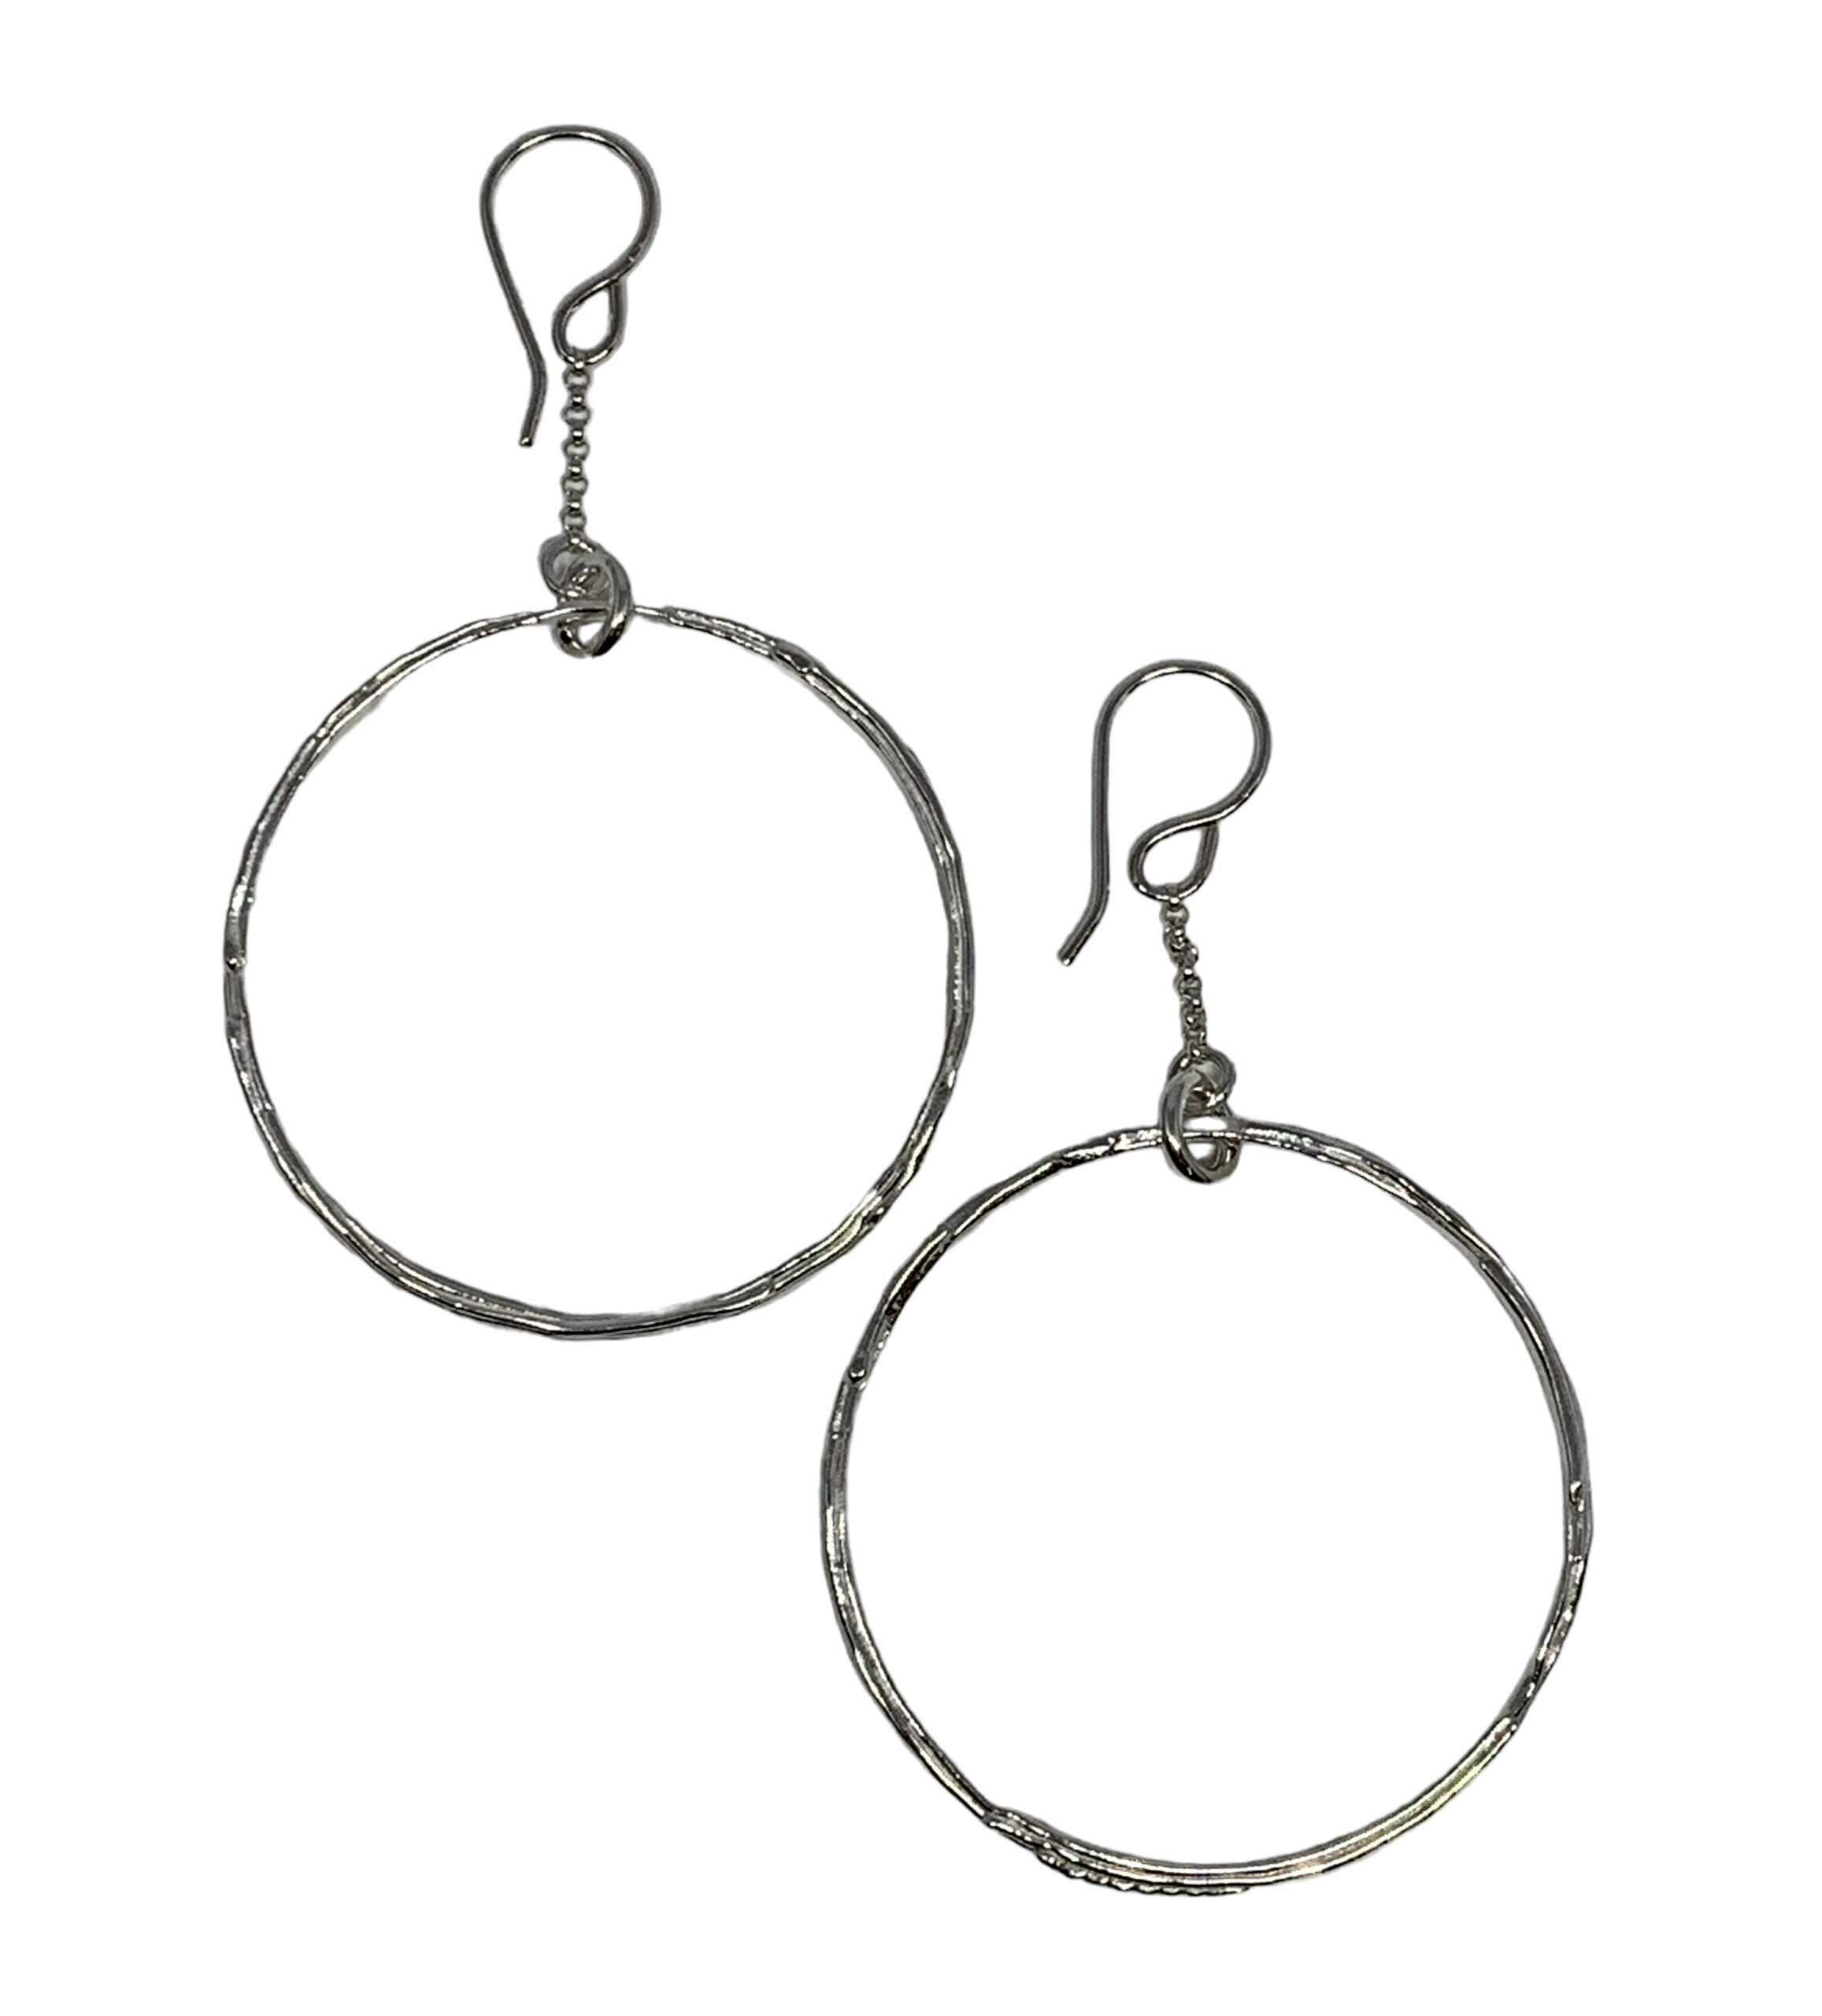 Handmade silver earrings by A&R Jewellery at Effusion Art Gallery in Invermere, BC.